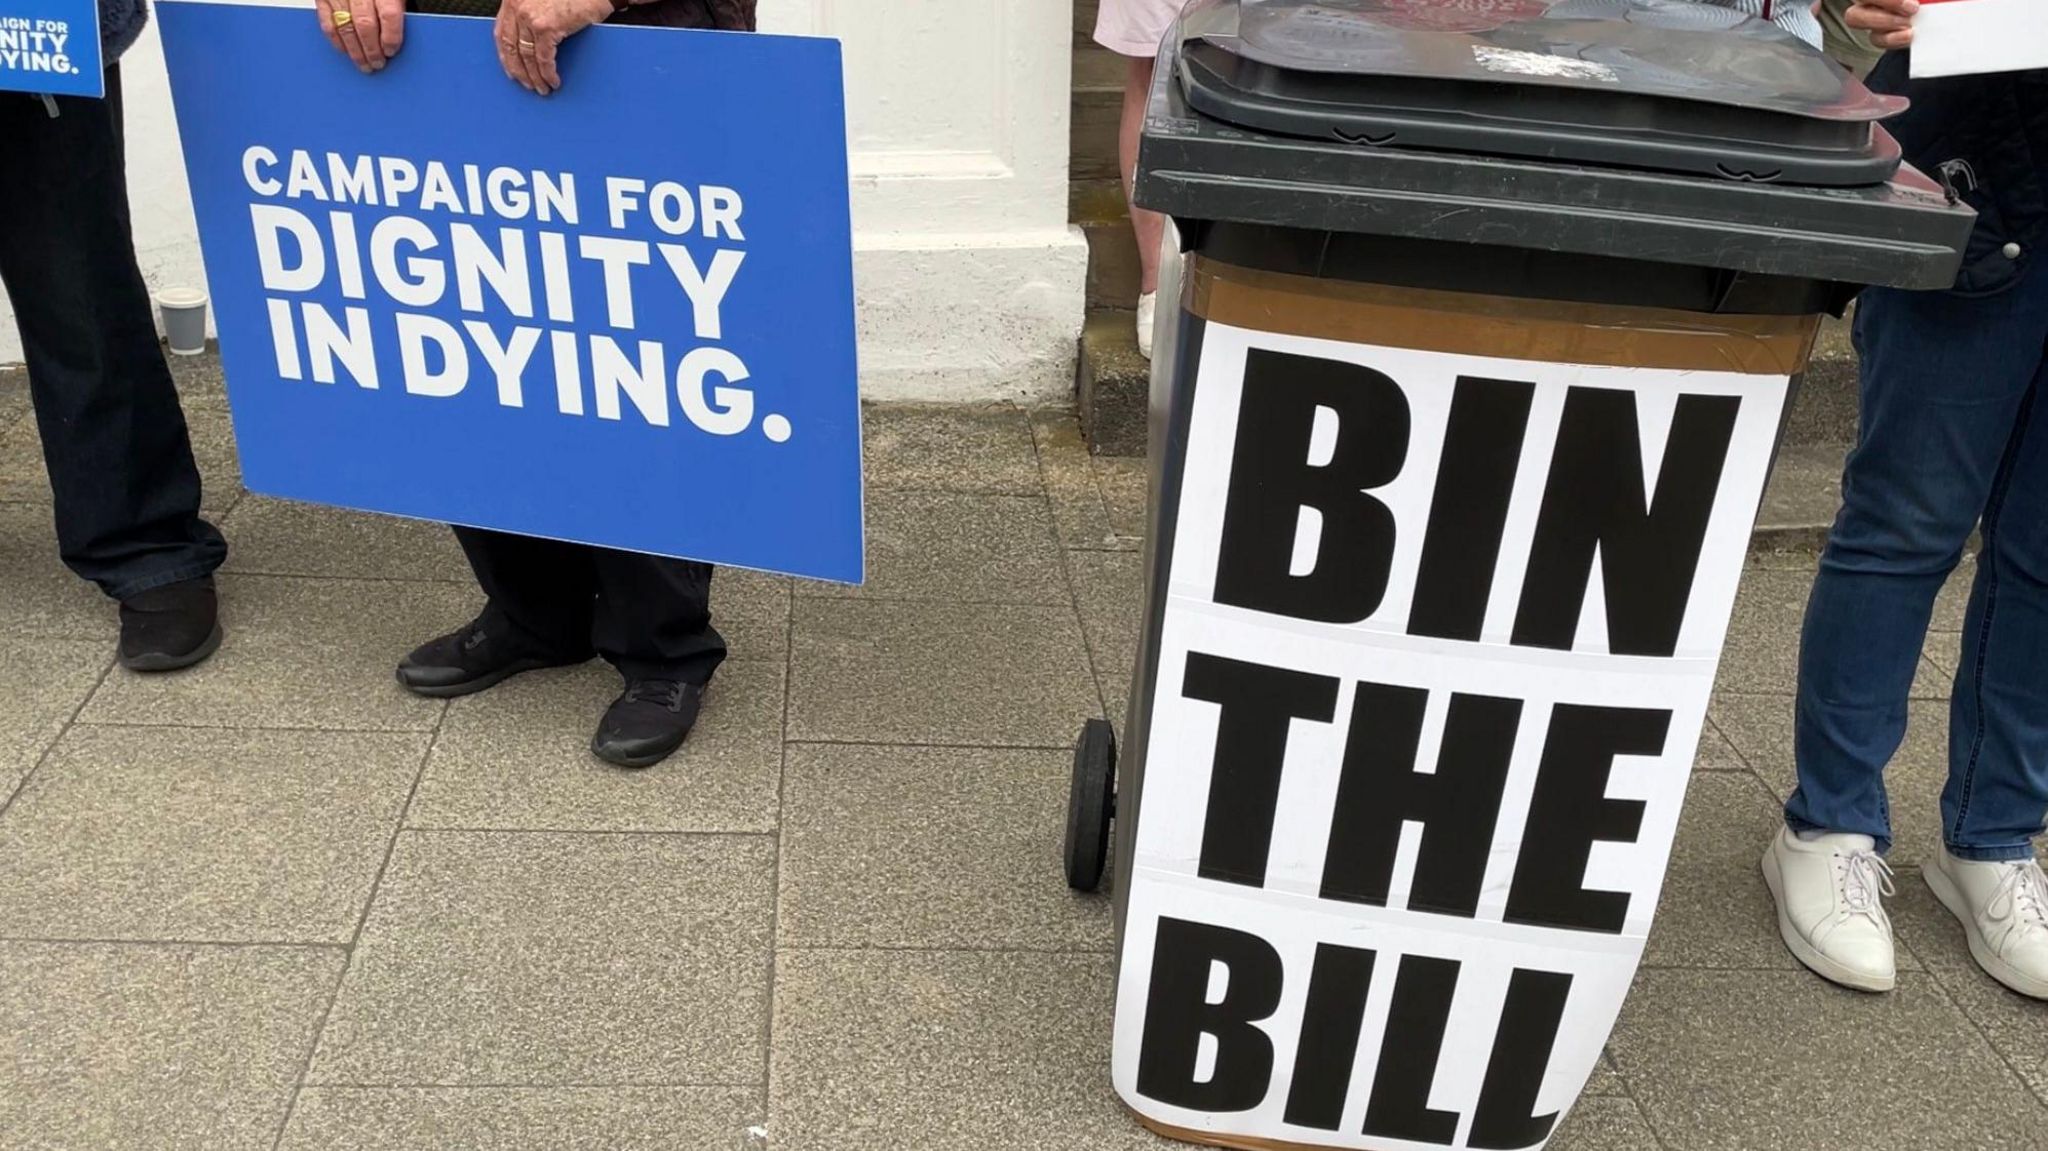 A campaign posted for assisted dying, as well as one opposing it stuck to a brown bin